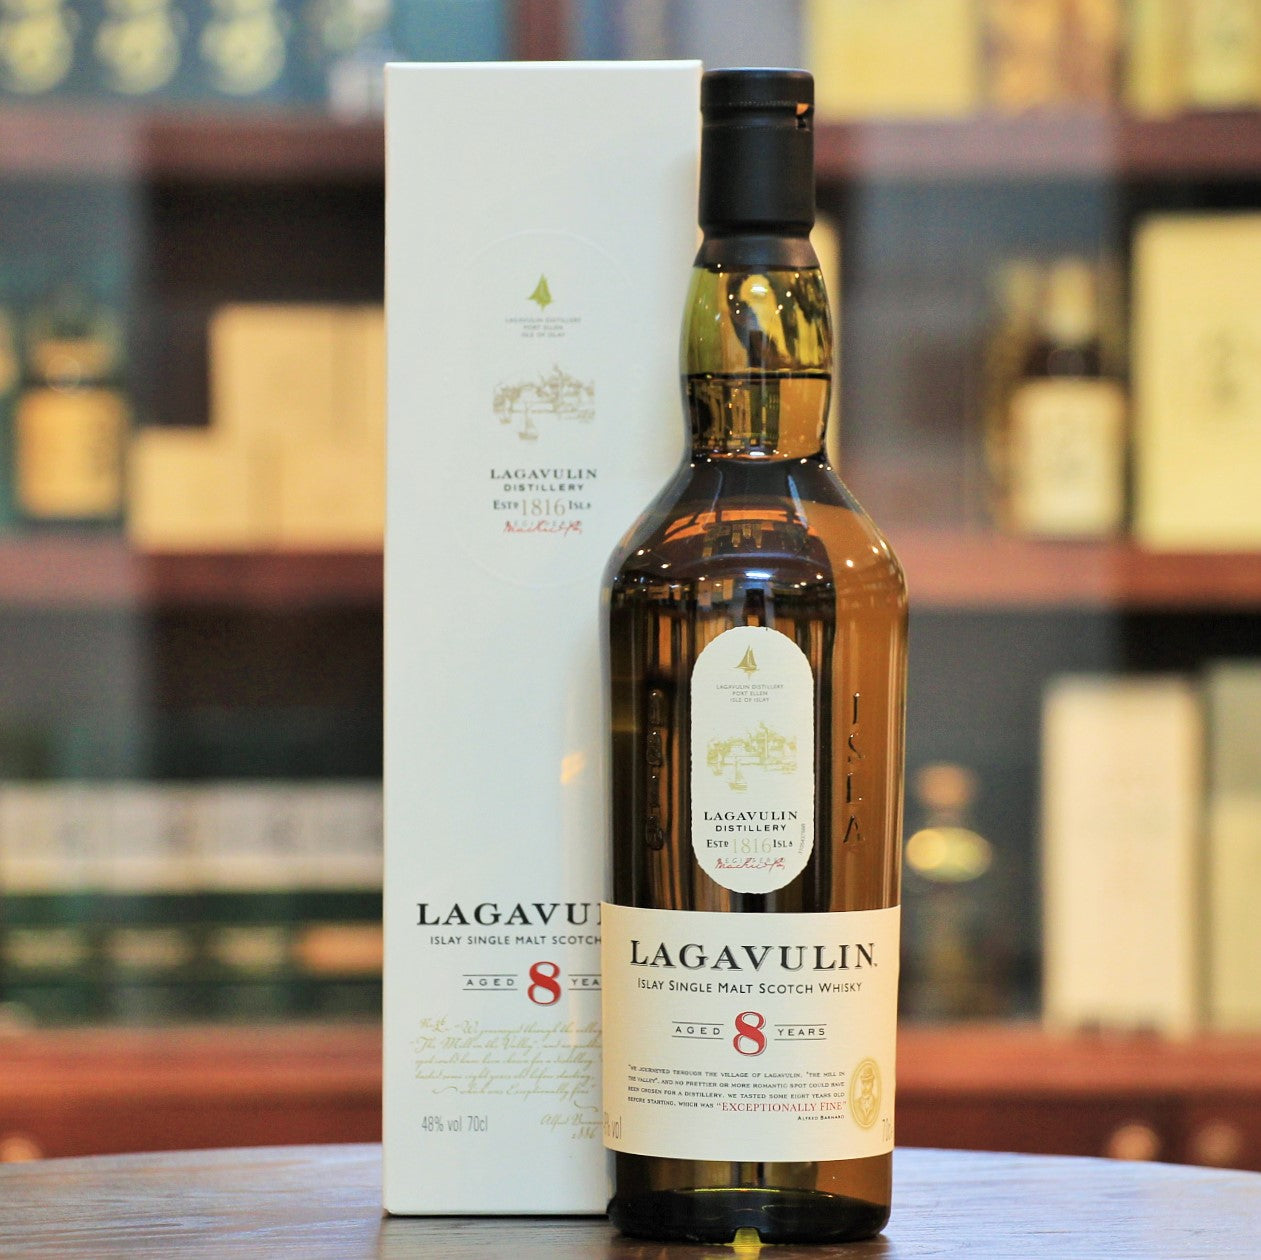 Lagavulin Single Malt Whisky 8 Years Old, Originally released as a part of the 200th Anniversary in 2016, this 8 Years Old has now become a part of the permanent core releases.